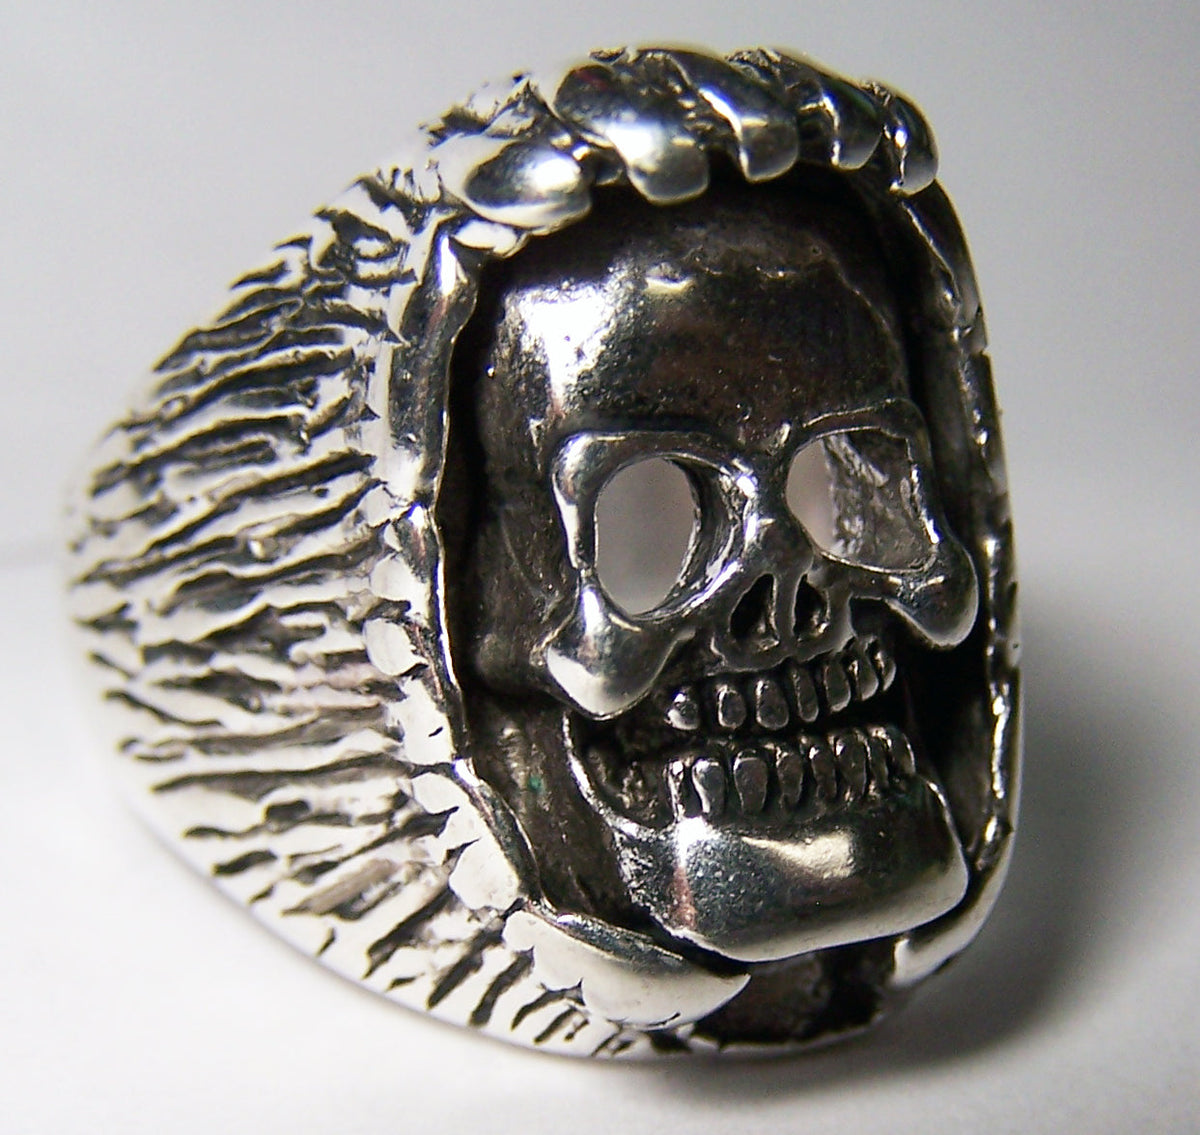 Wholesale HAND OVER SMILING SKULL HEAD BIKER RING  (Sold by the piece) *